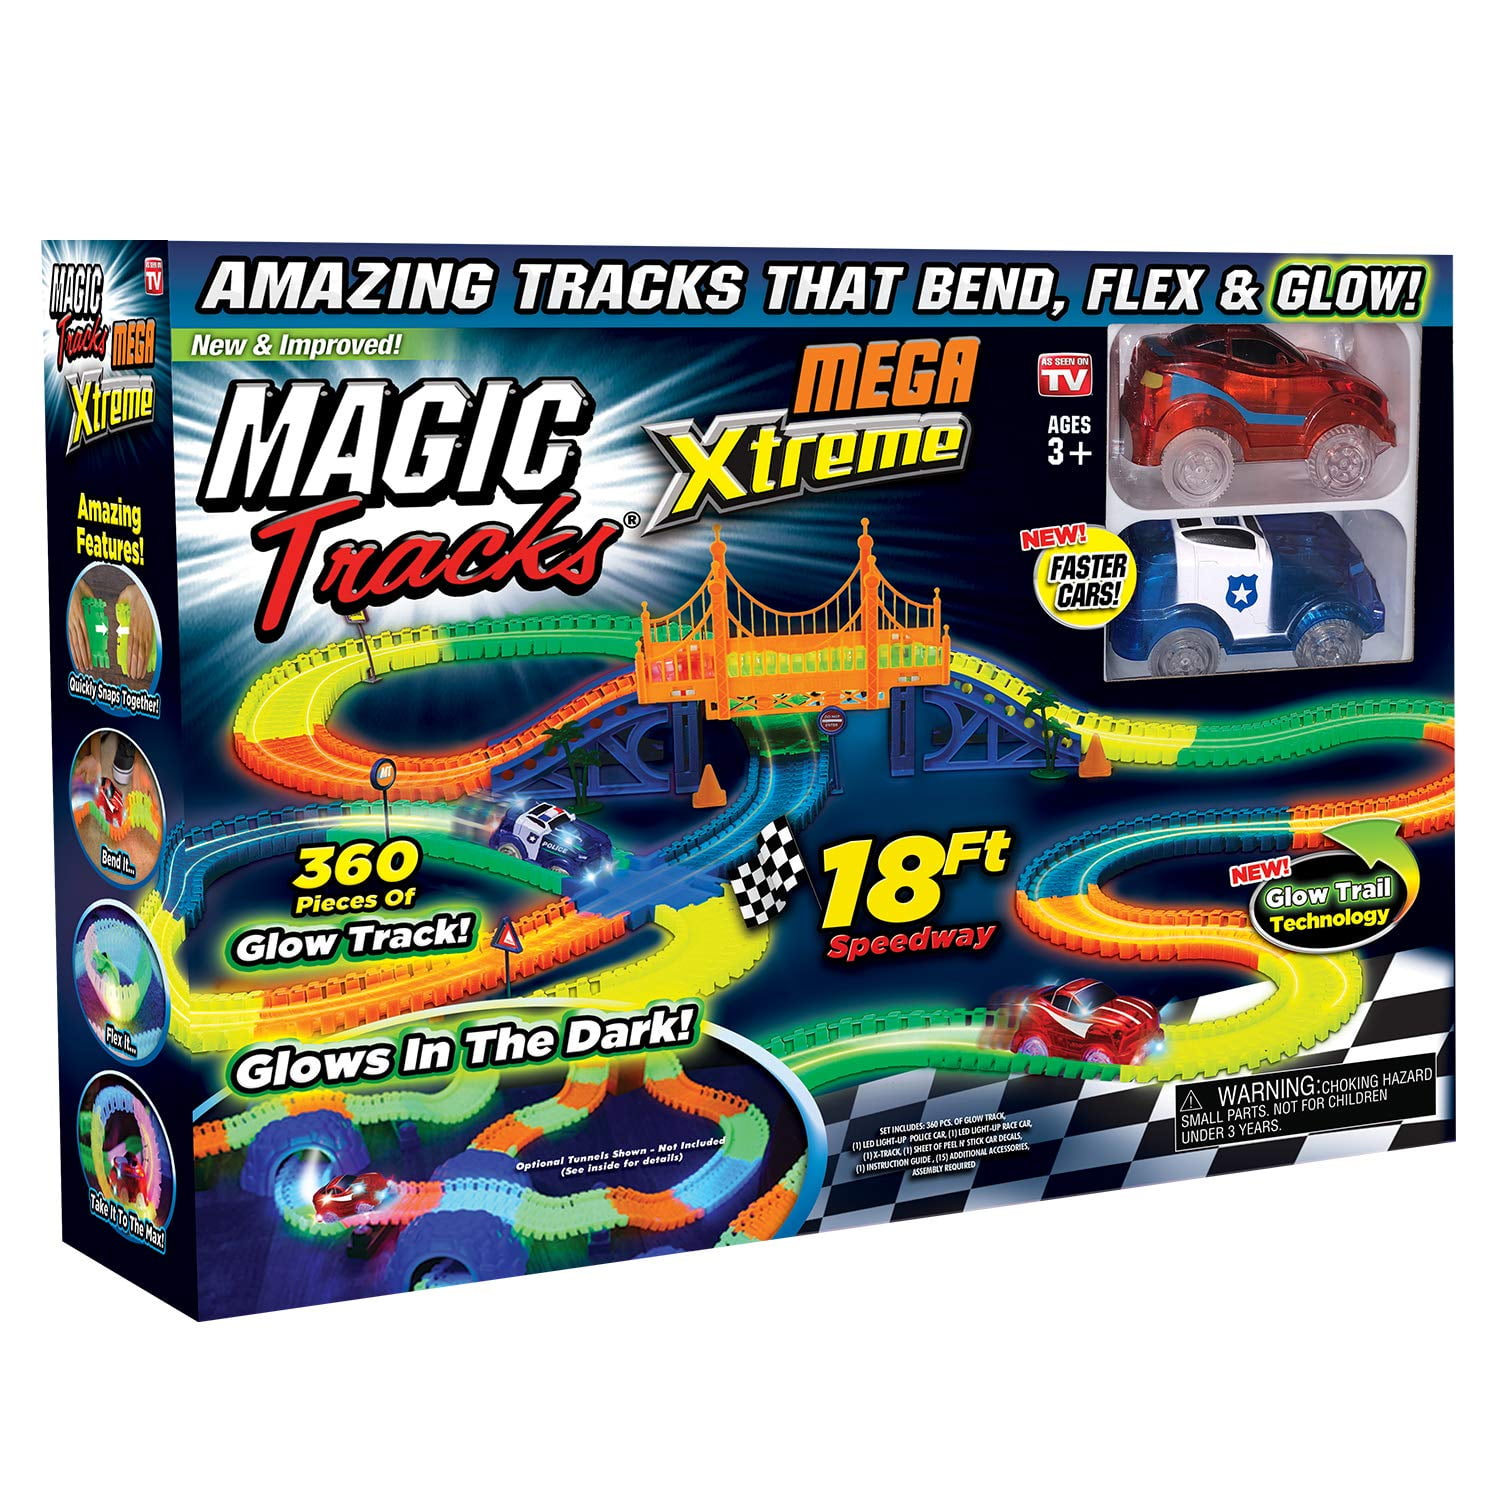 Bendable Glow in The Dark Racetrack As Seen on TV Ontel Magic Tracks Rescue with 2 Race Car & 10 of Flexible 